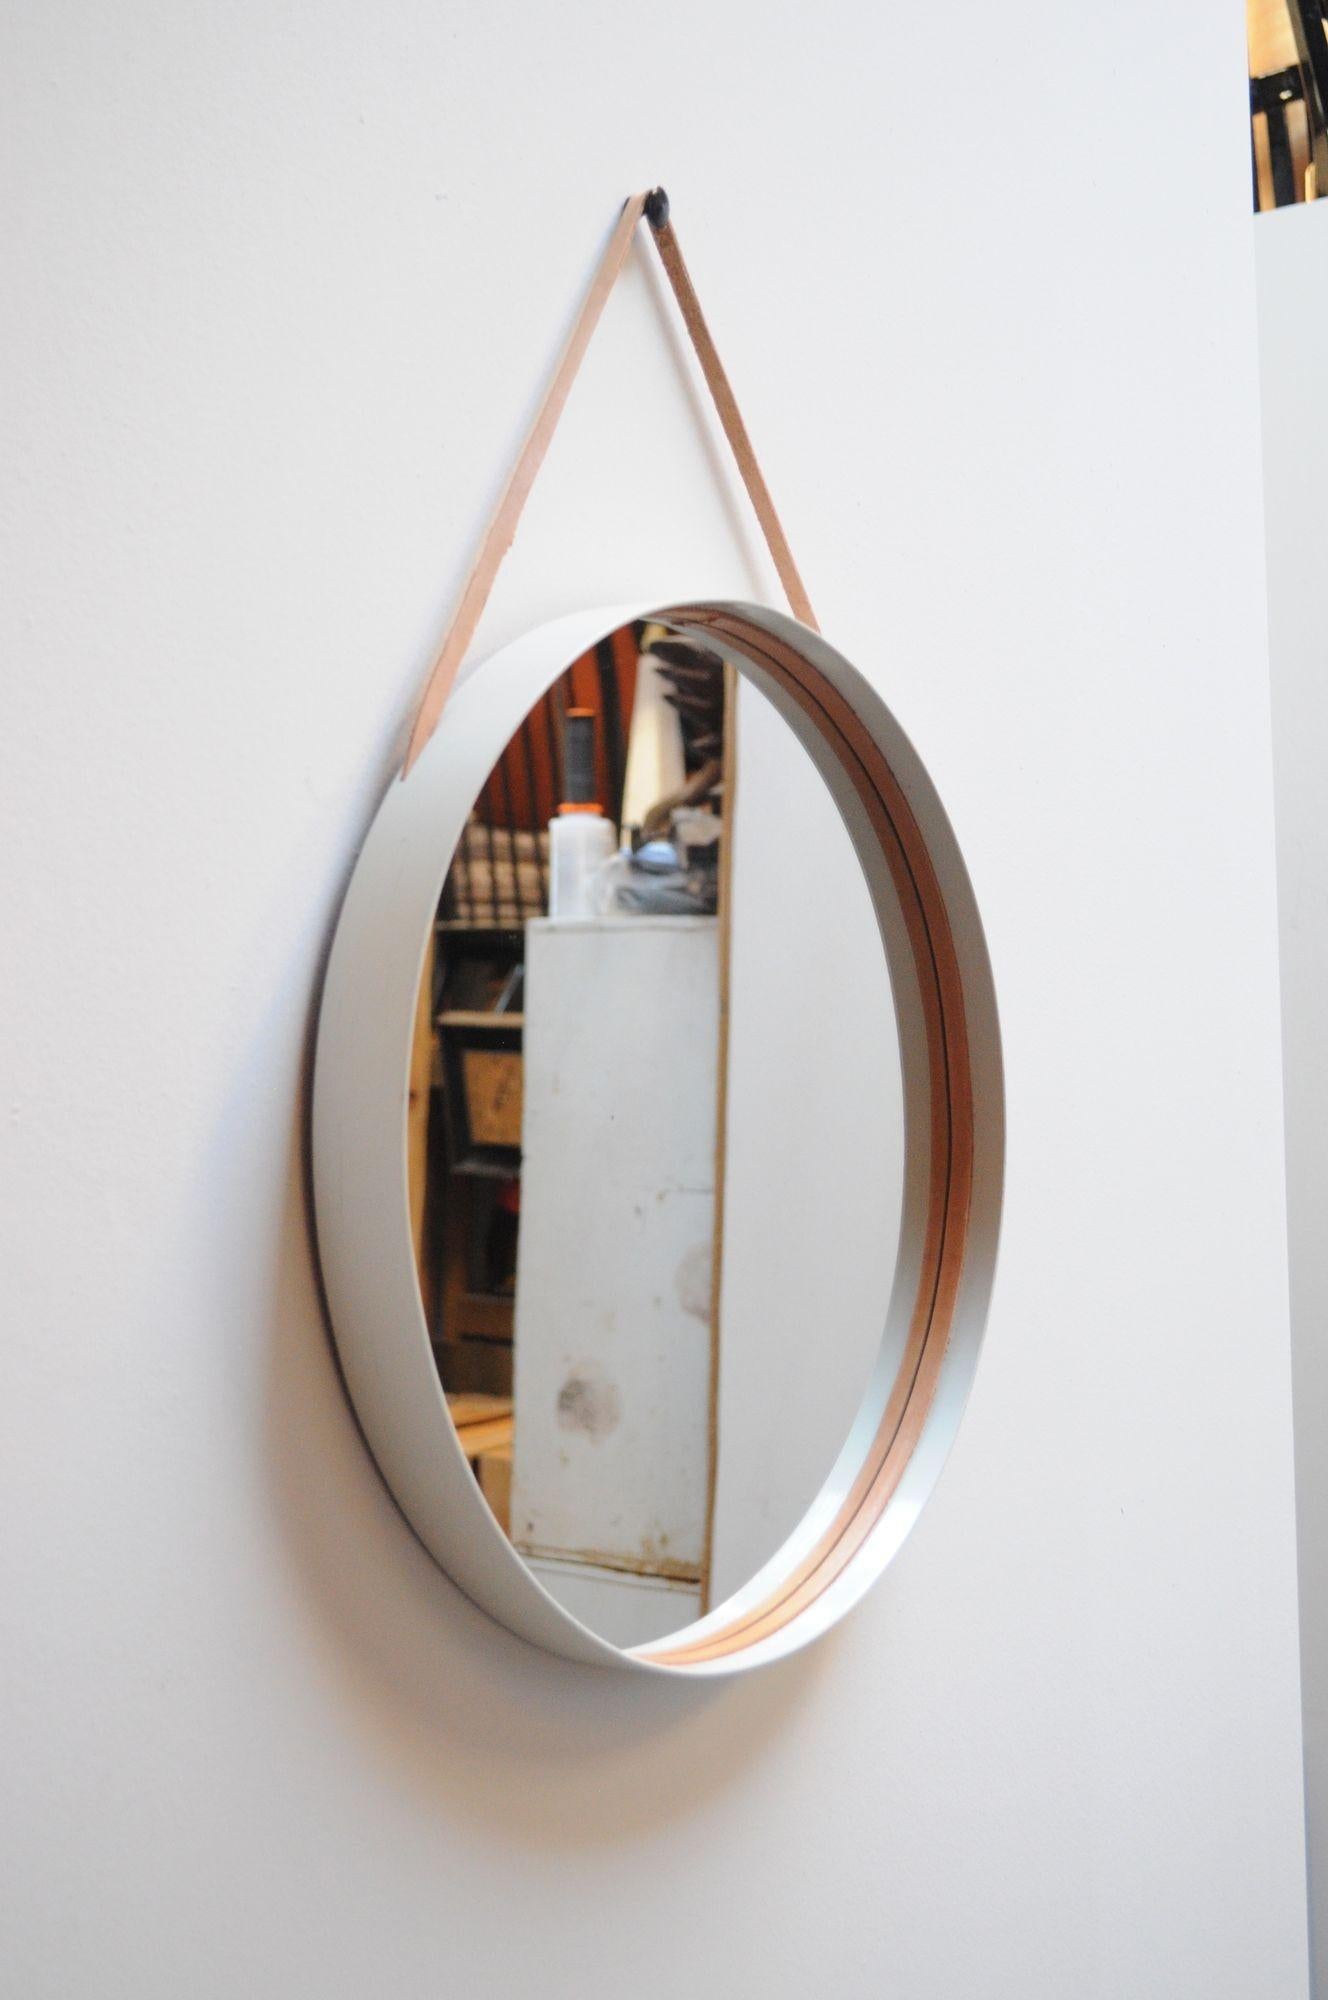 Scandinavian Modern Swedish Modern White Bentwood Mirror with Leather Hanging Strap by Glas Mäster For Sale